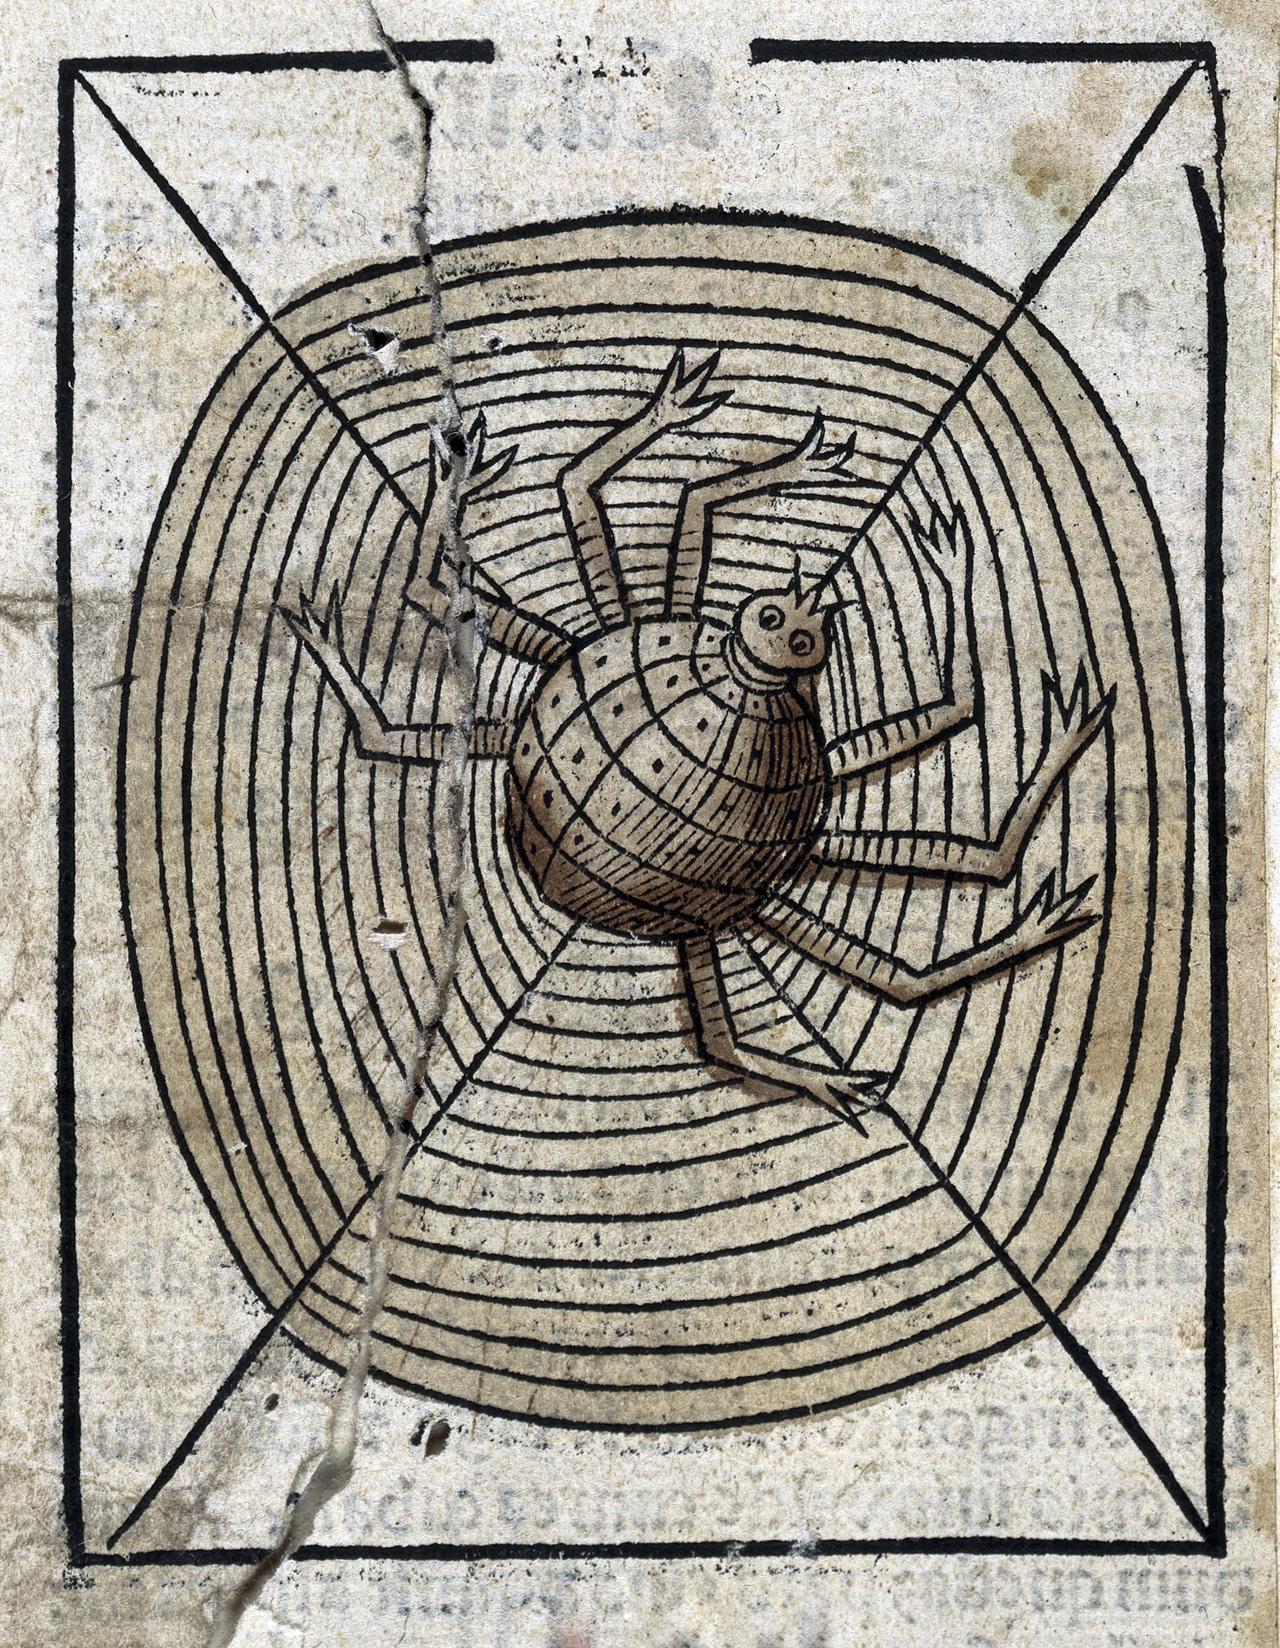 Anonymous, A spider on its web, 1547. London, Wellcome Collection.